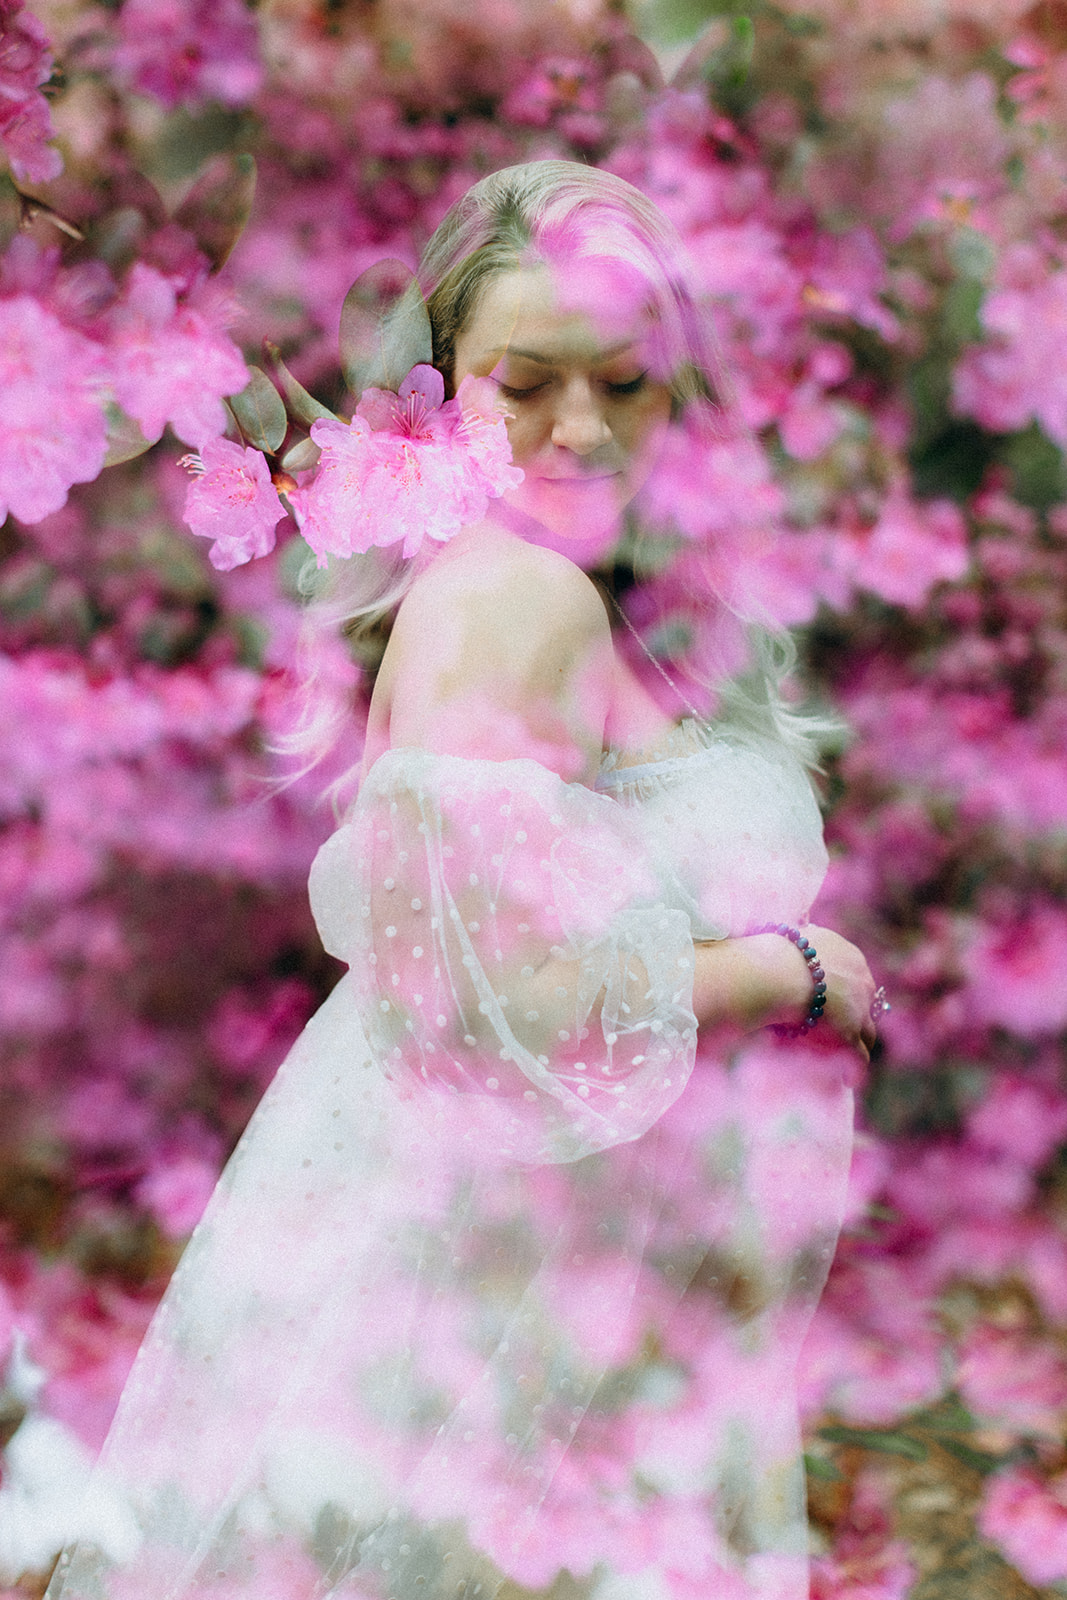 Artistic maternity image of a girl in white dress with pink flowers see through the image double exposure 